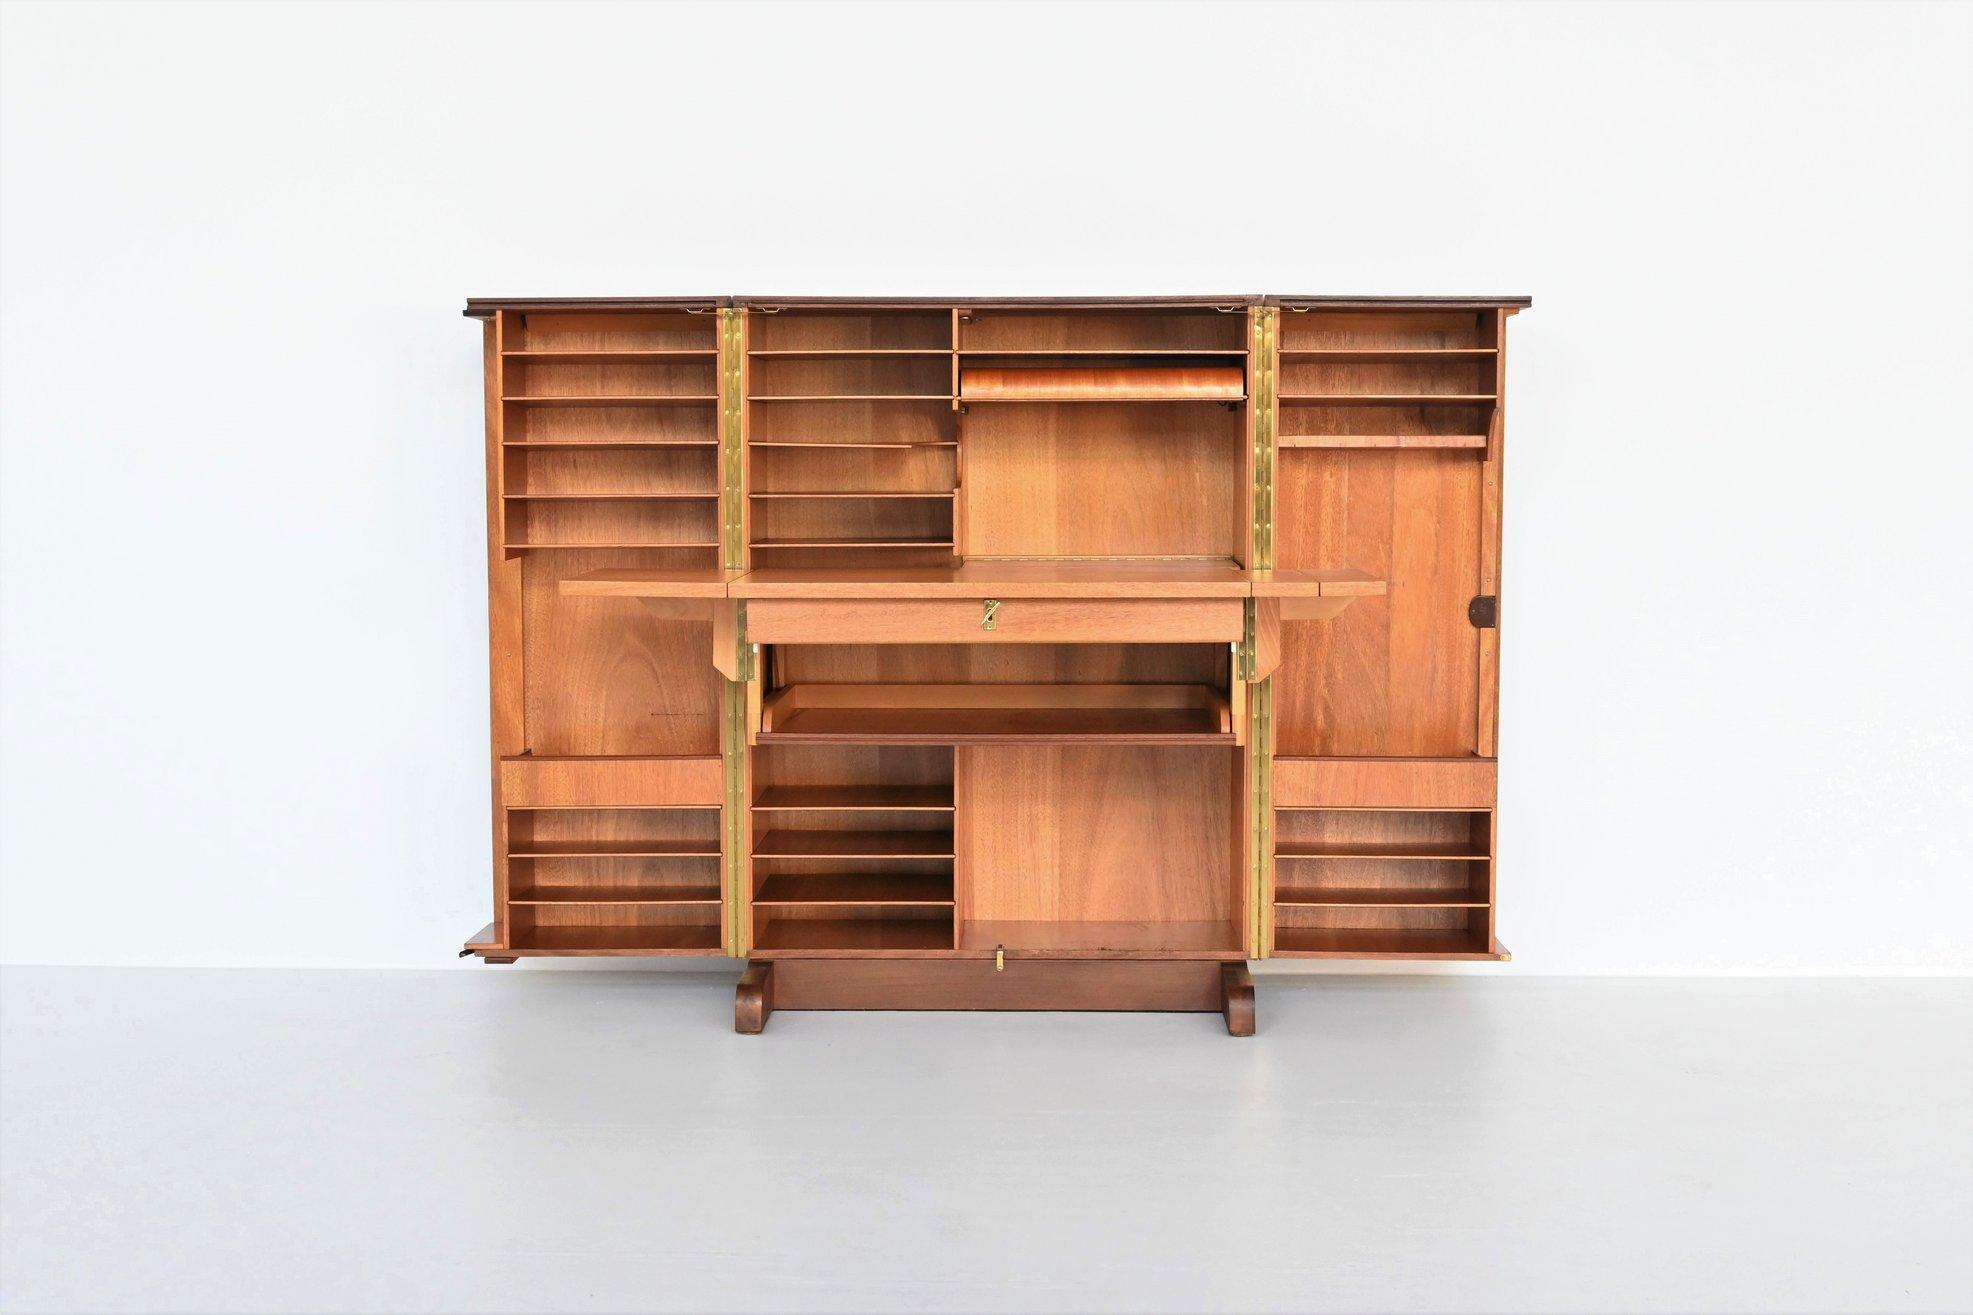 Stunning foldable writing desk designed by Mummenthaler & Meier, Switzerland 1950. This model is called “Magic Box” and the name says it all. When you open the cabinet, it shows a very nice working space with a plenty of storage options. By pulling